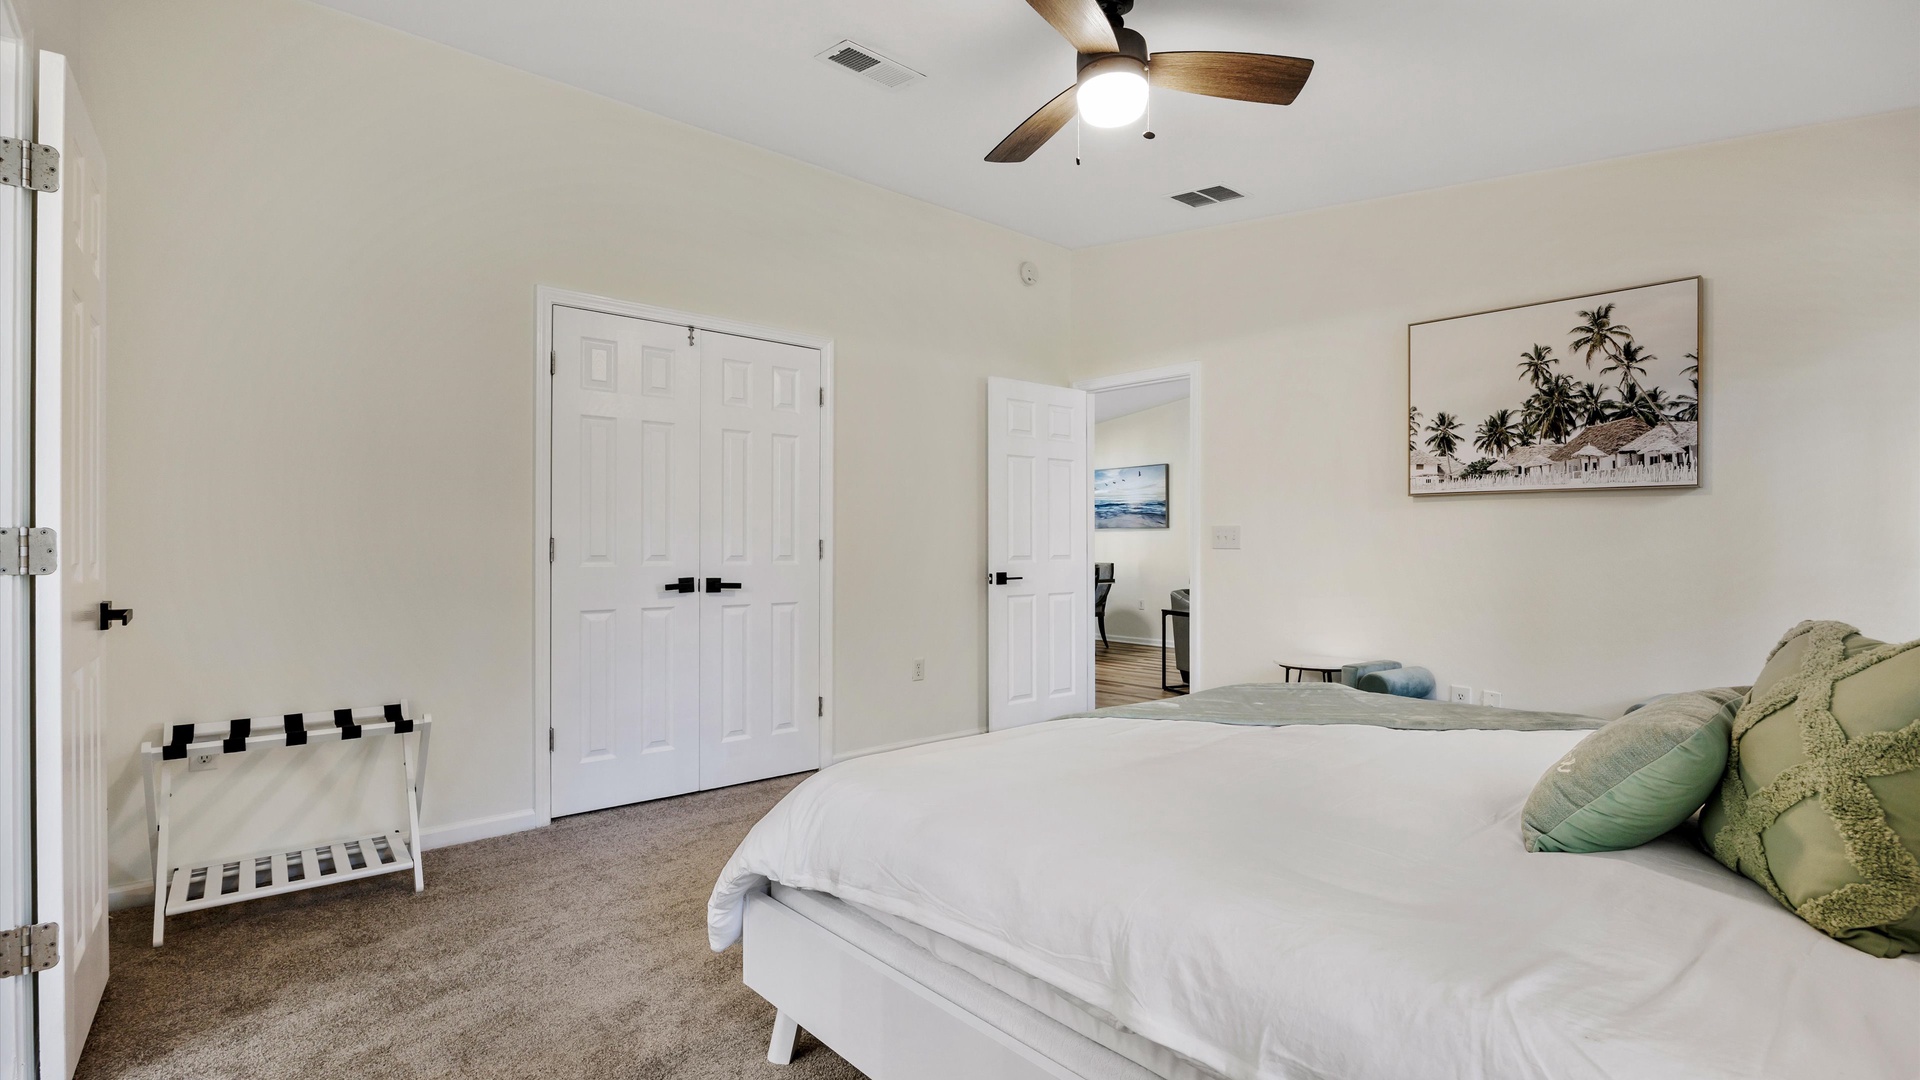 The master suite boasts a king-sized bed & luxurious private ensuite